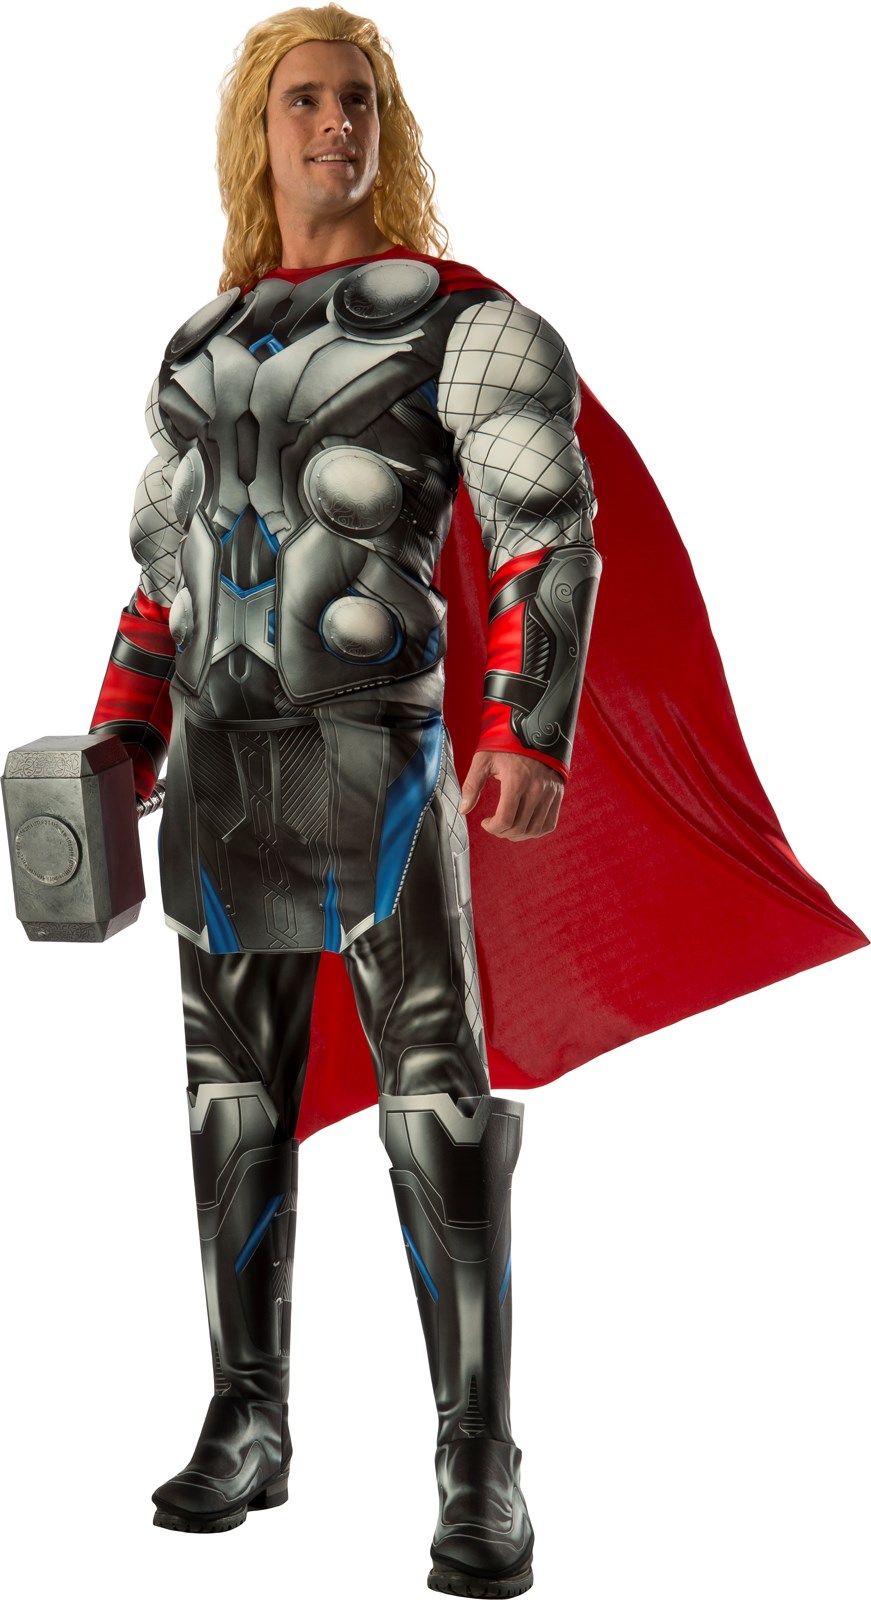 Avengers 2 - Age of Ultron: Deluxe Adult Thor Costume